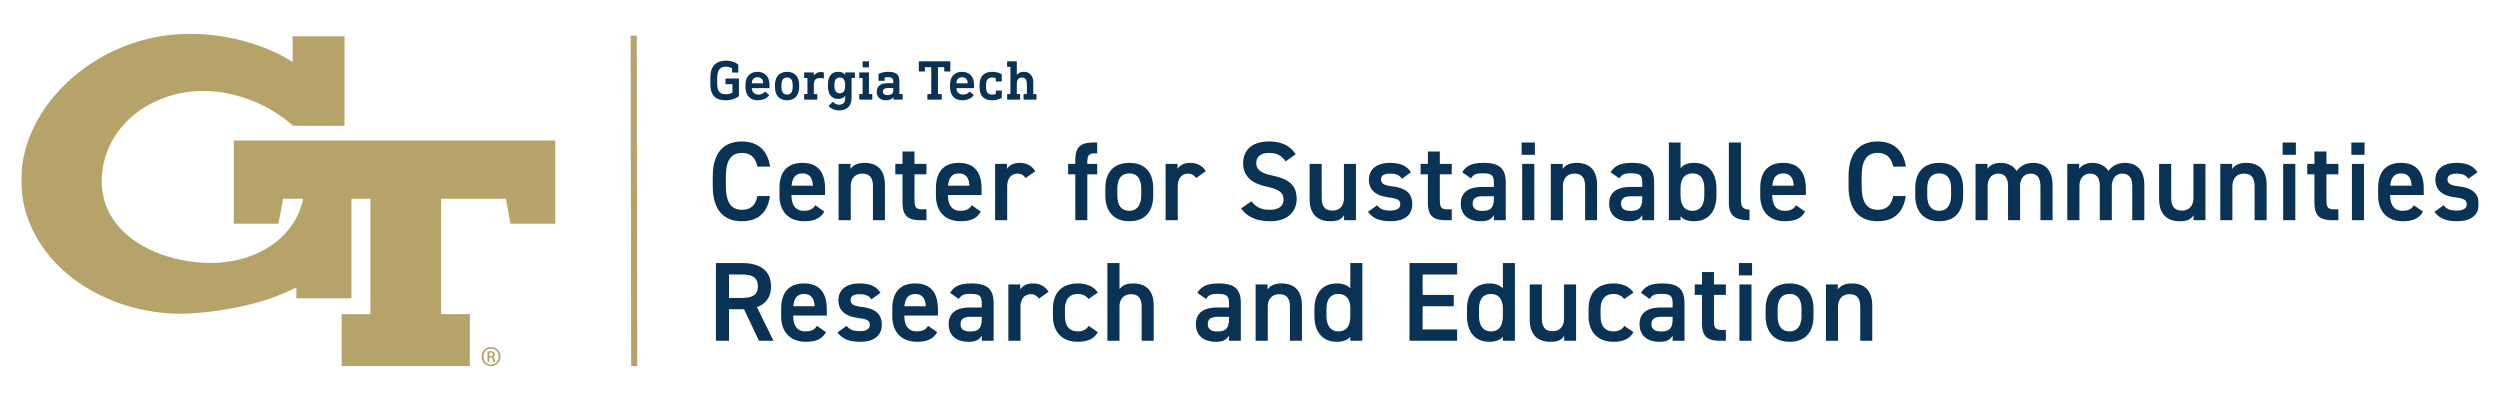 Center for Sustainable Communities Research and Education